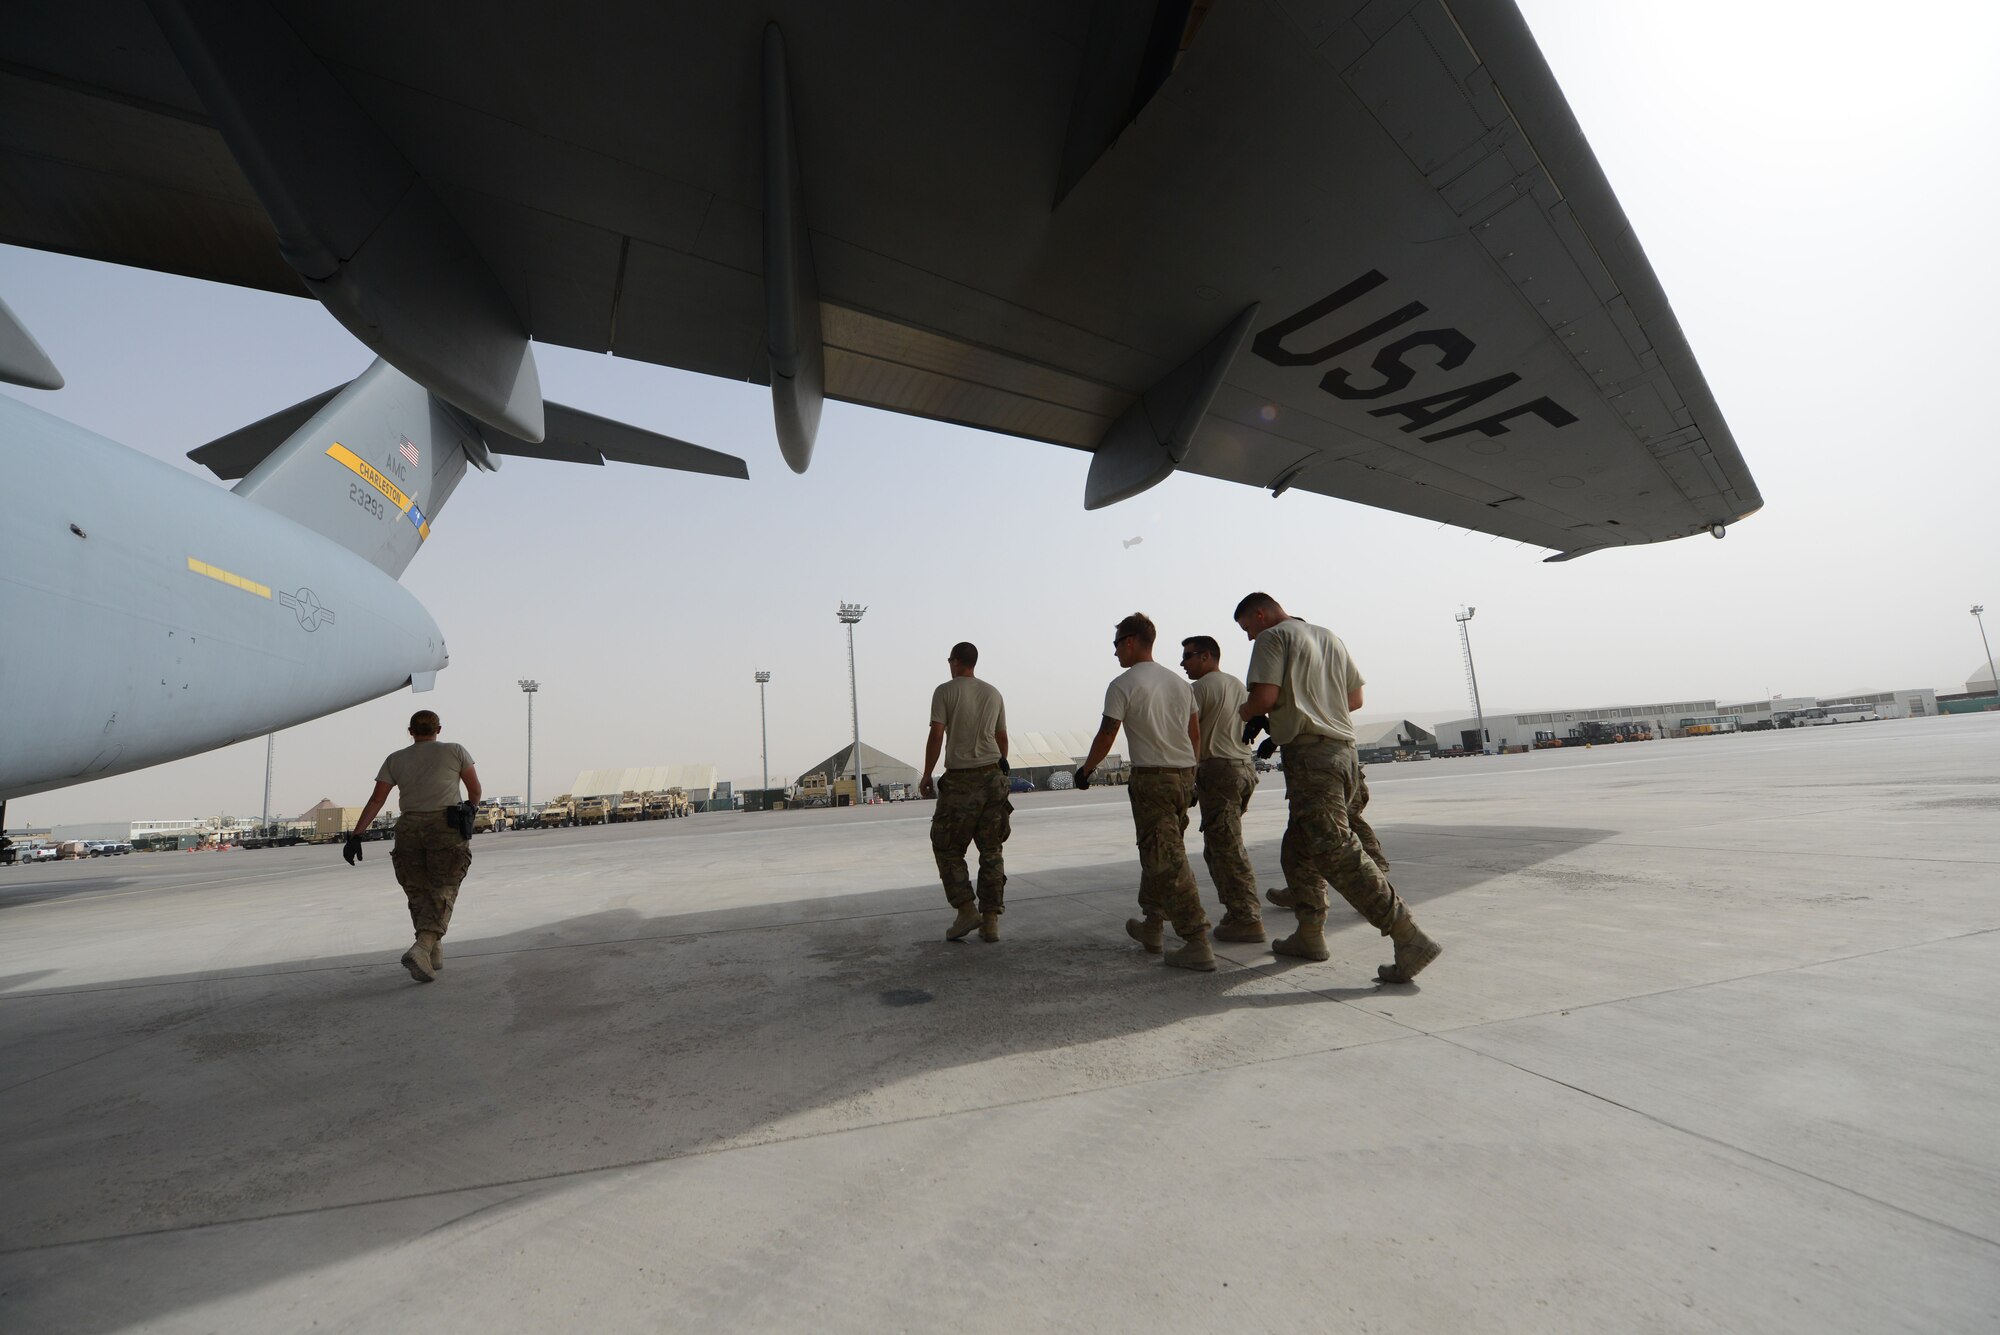 Airmen assigned to the 455th Expeditionary Aerial Port Squadron Detachment 1, walk back to the Air Terminal Operations Center after loading two Heavy Expanded Mobility Tactical Trucks onto a C-17 Globemaster III at Mazar-e Sharif, Afghanistan June 24, 2014. As part of the retrograde mission, EAPS Det 1 is responsible for inspecting and loading cargo and vehicles leaving Mazar-e Sharif.